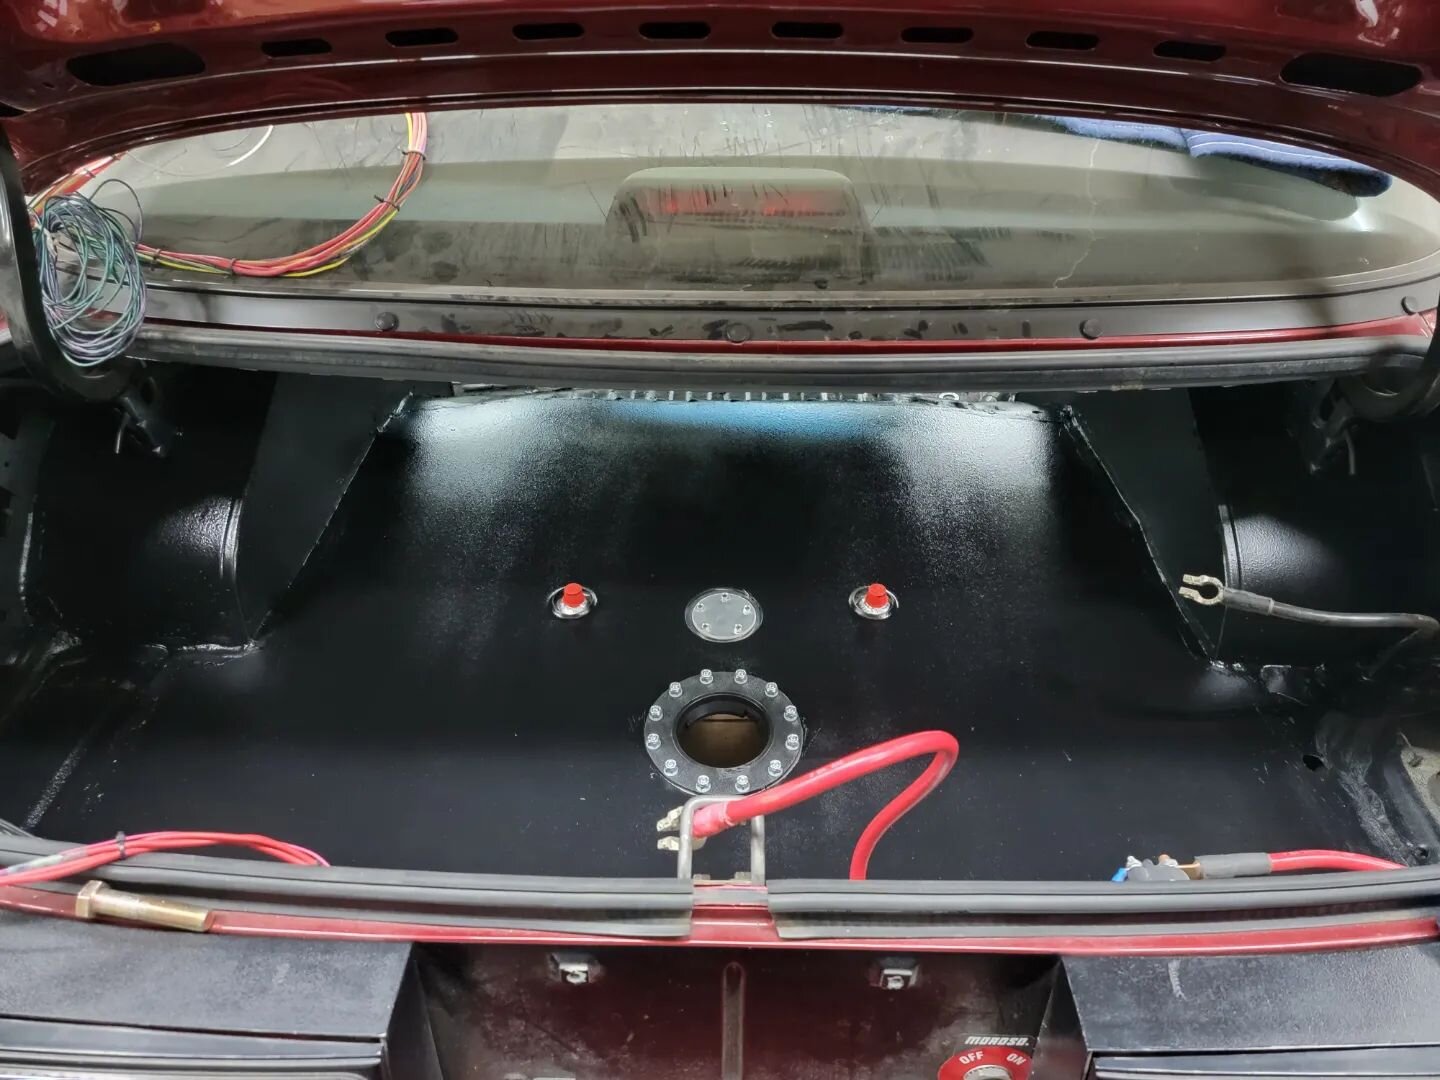 New trunk floor with flush mounted fuel cell in this foxbody mustang. #fabrication #fablife #racecar #mustang #foxbody #madeintheusa